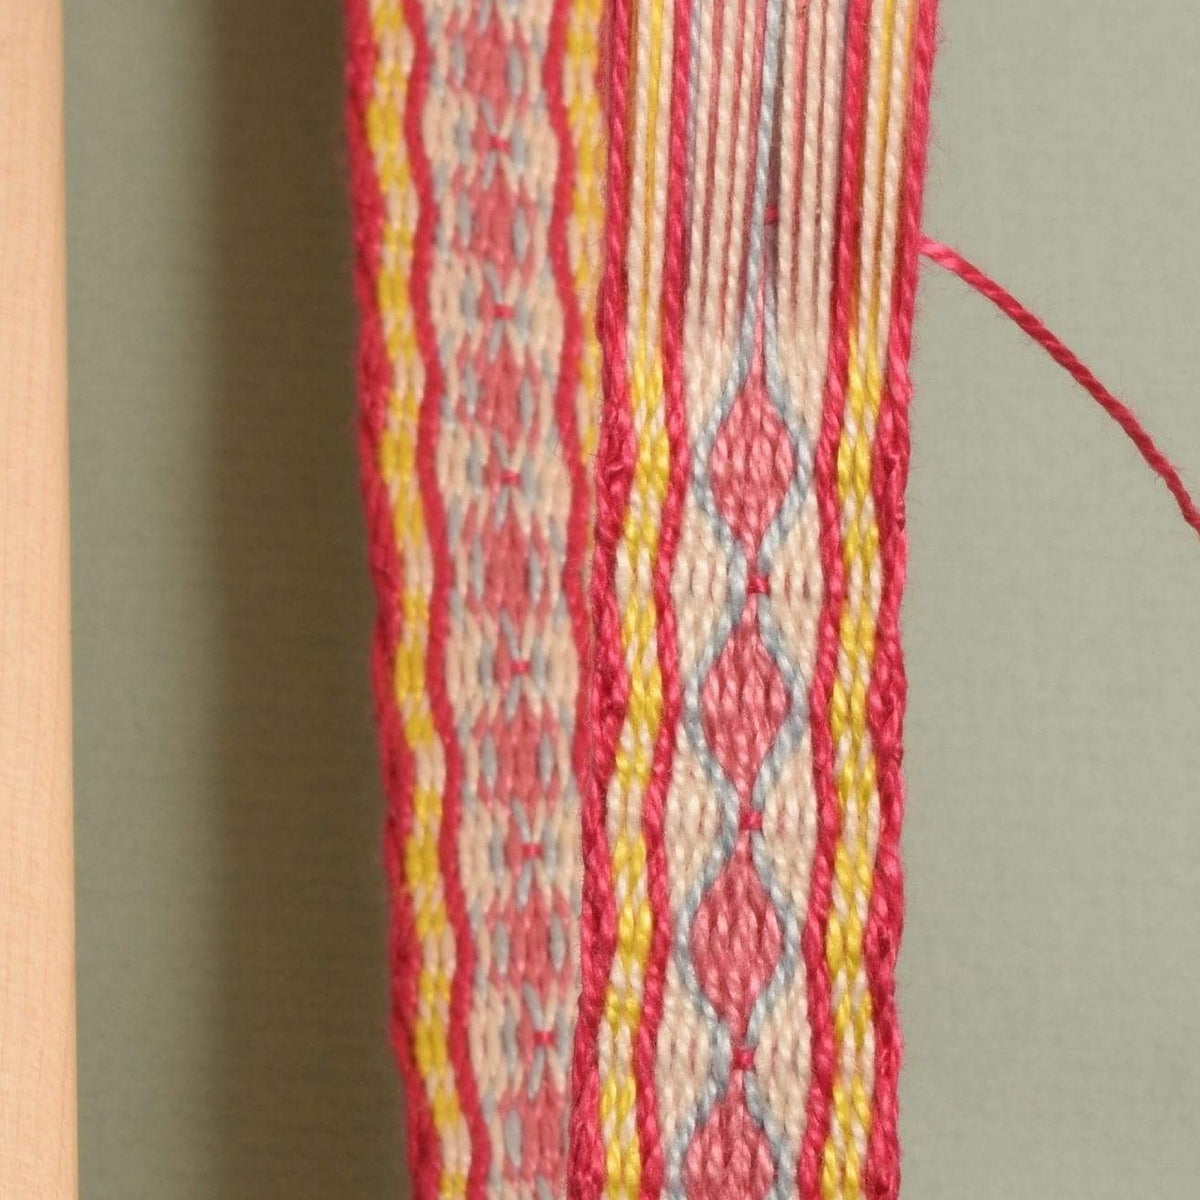 Weaving bands on a Schacht Inkle loom